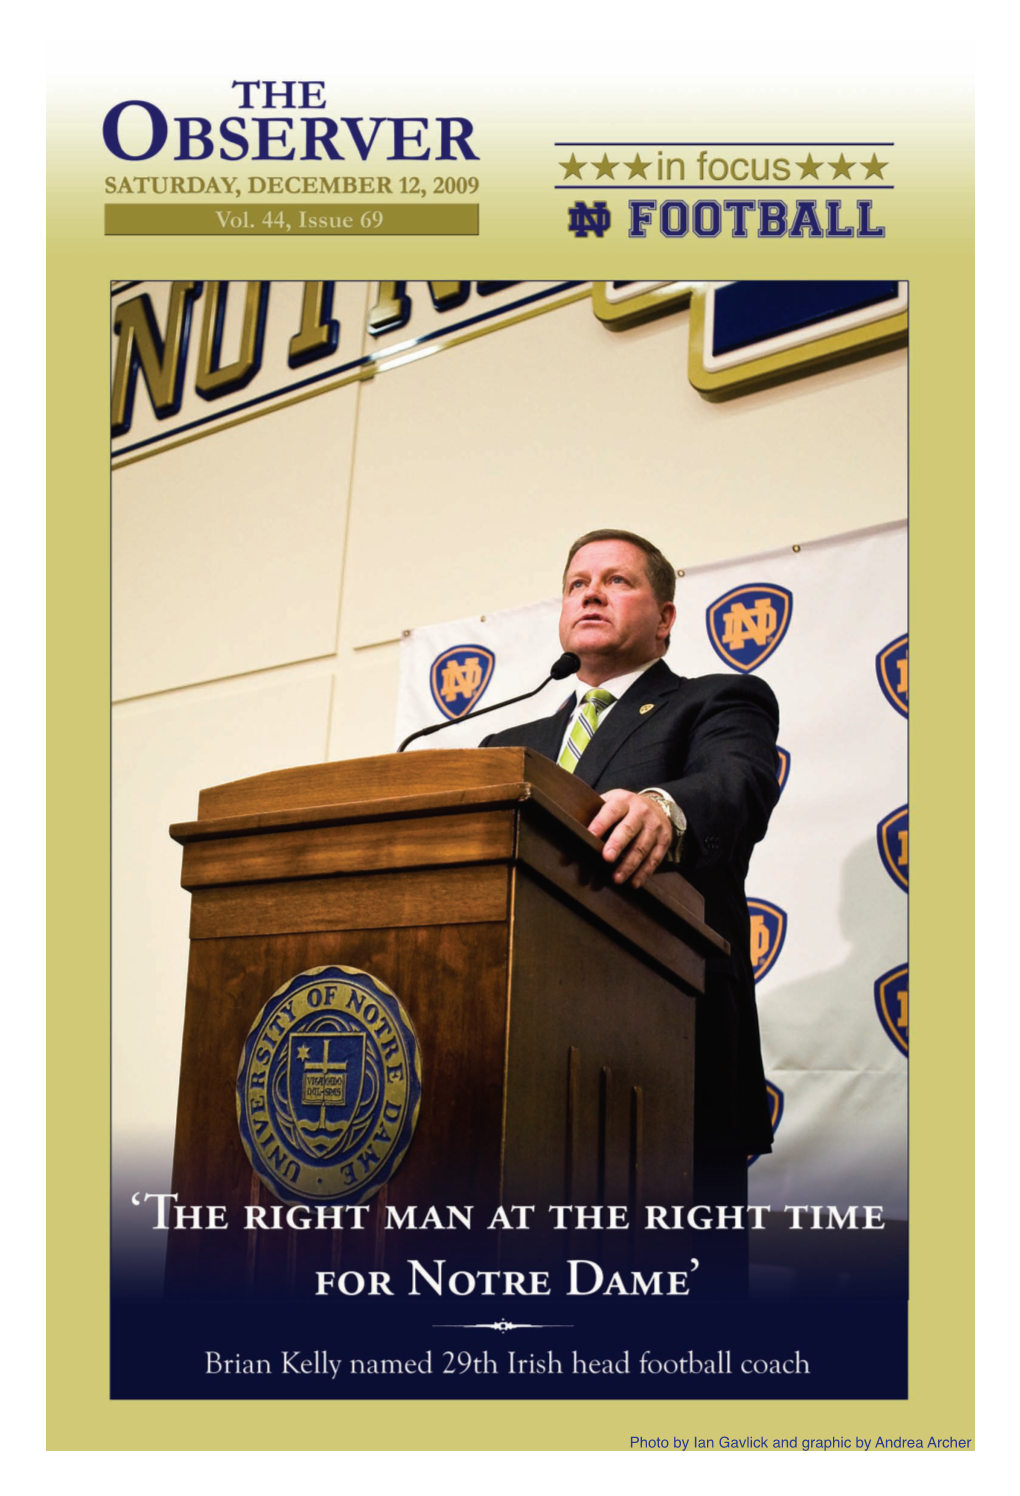 Brian Kelly 'The Right Man' for ND